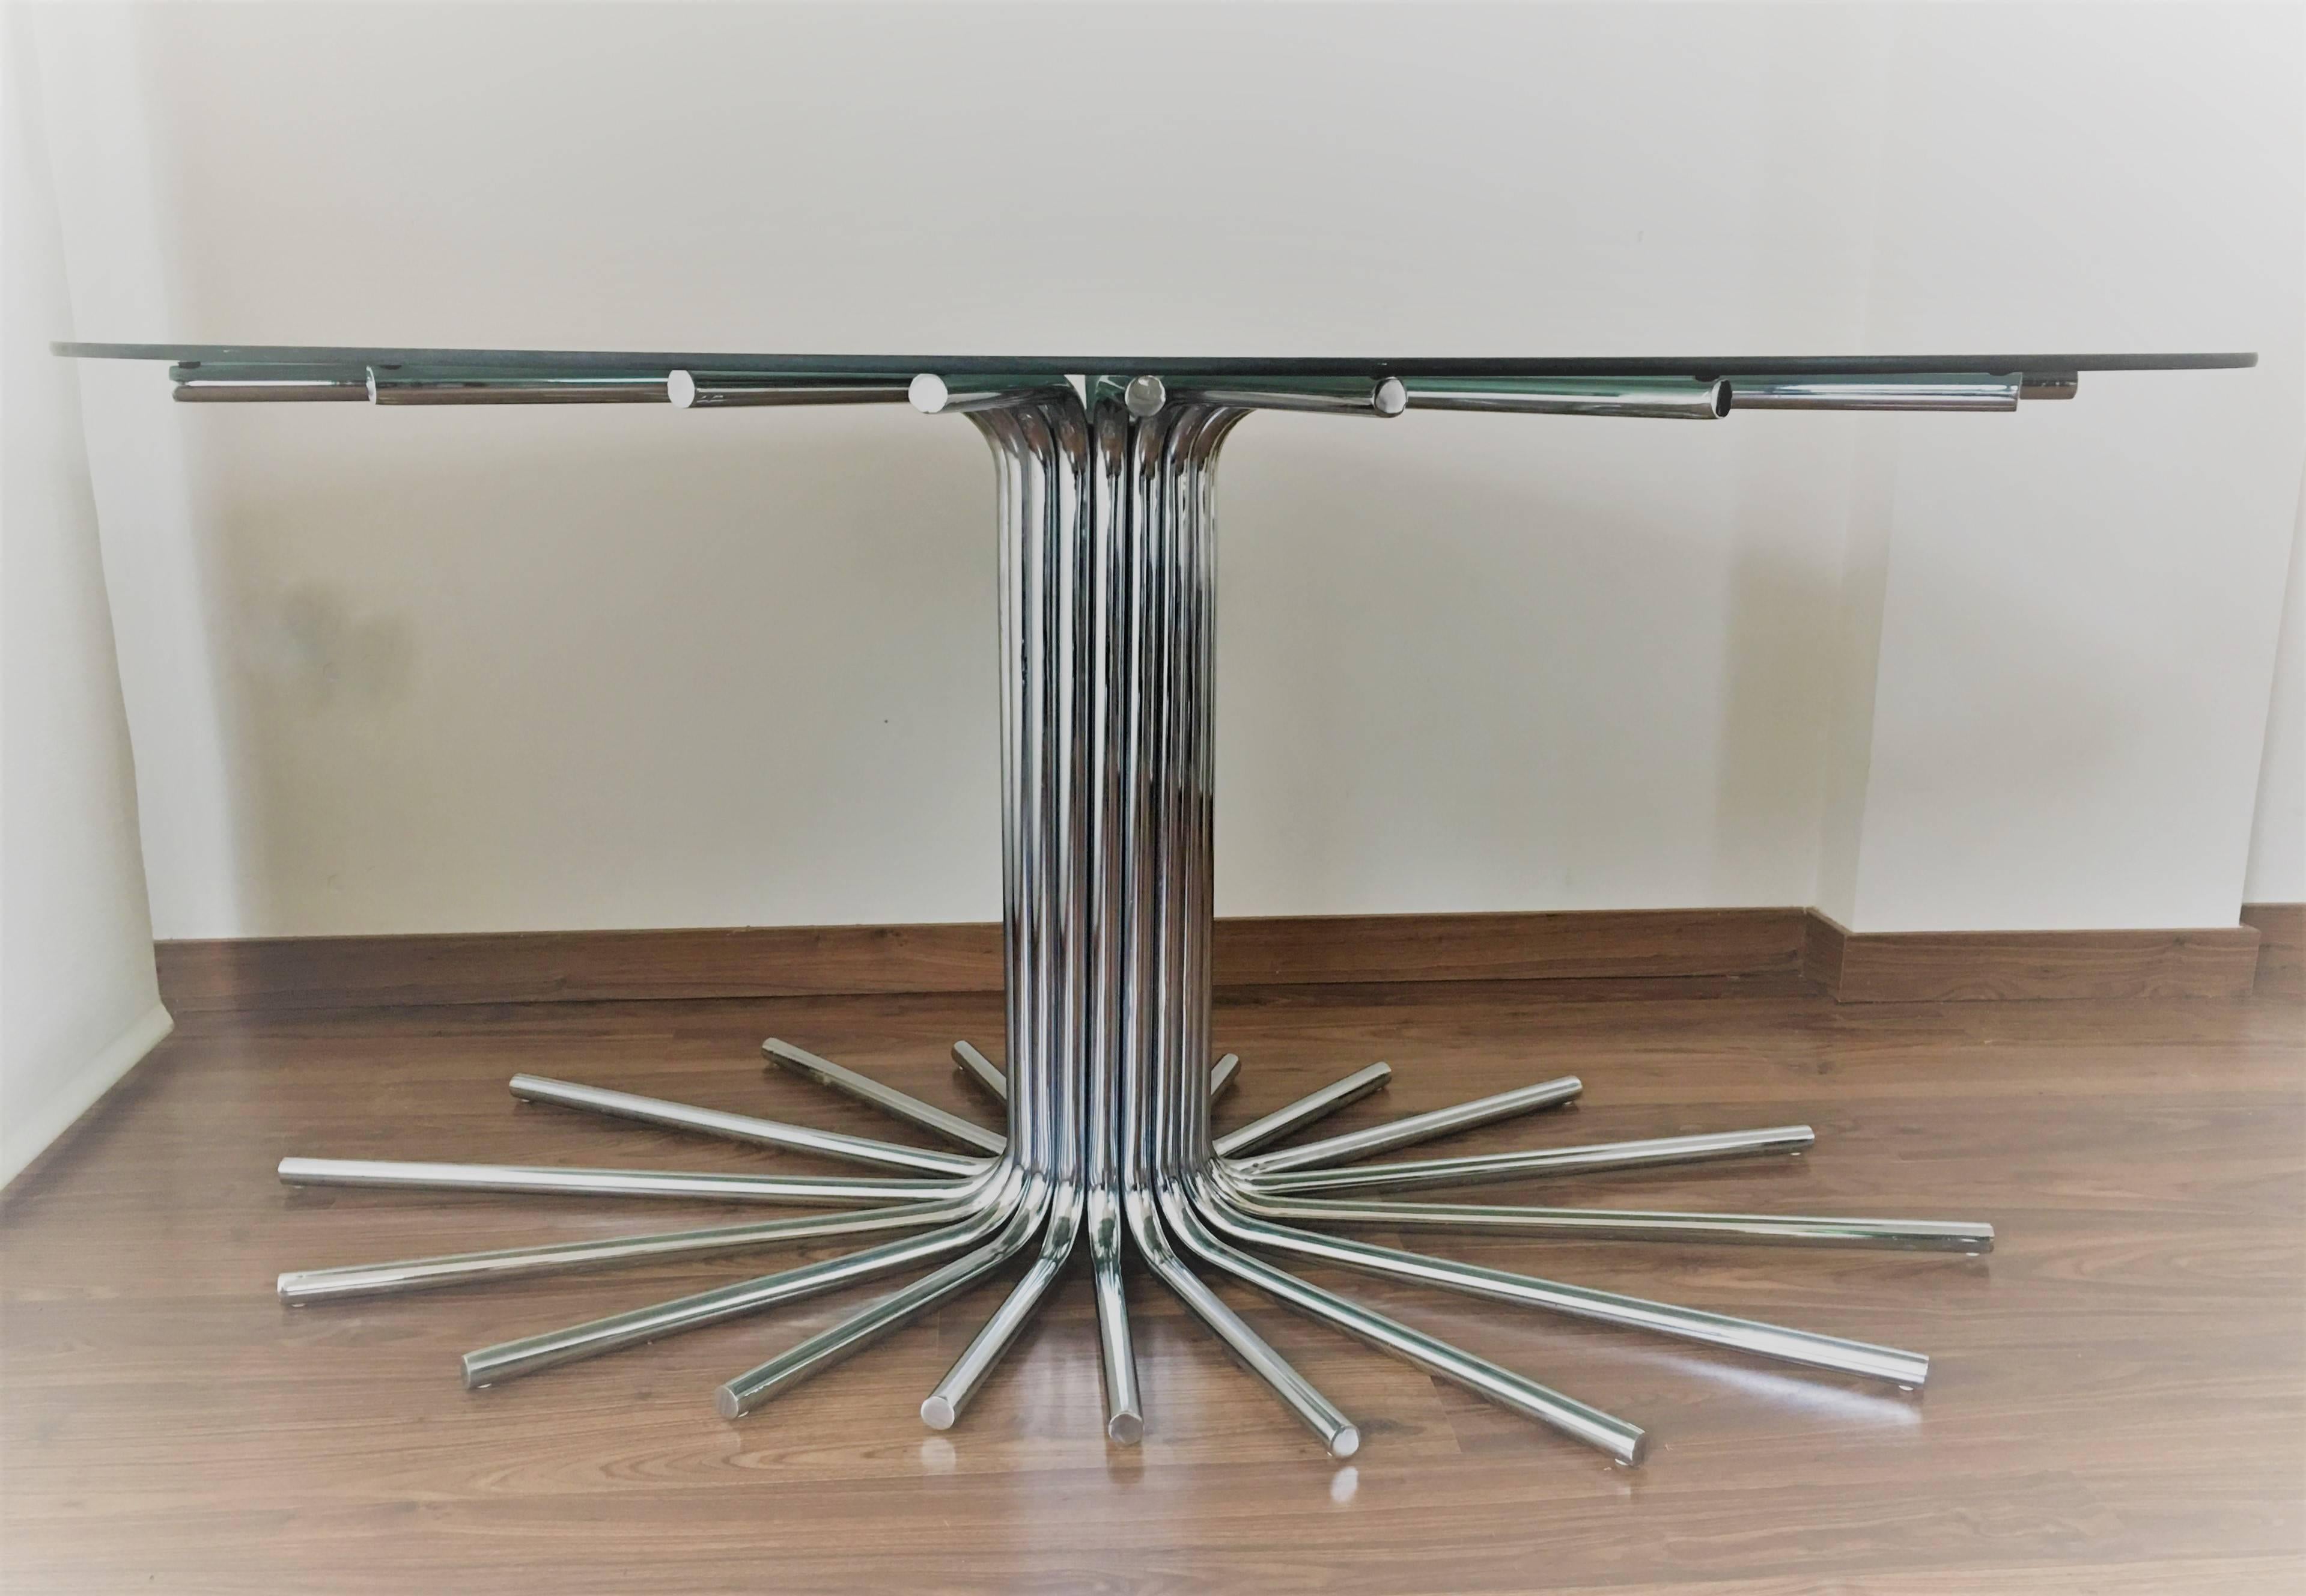 Midcentury chrome star base table with smoked glass Oval top in the manner Gastone Rinaldi. Chrome in nice condition.
Spectacular midcentury chrome starburst dining table with smoked glass top. This table allows for a guaranteed match to your